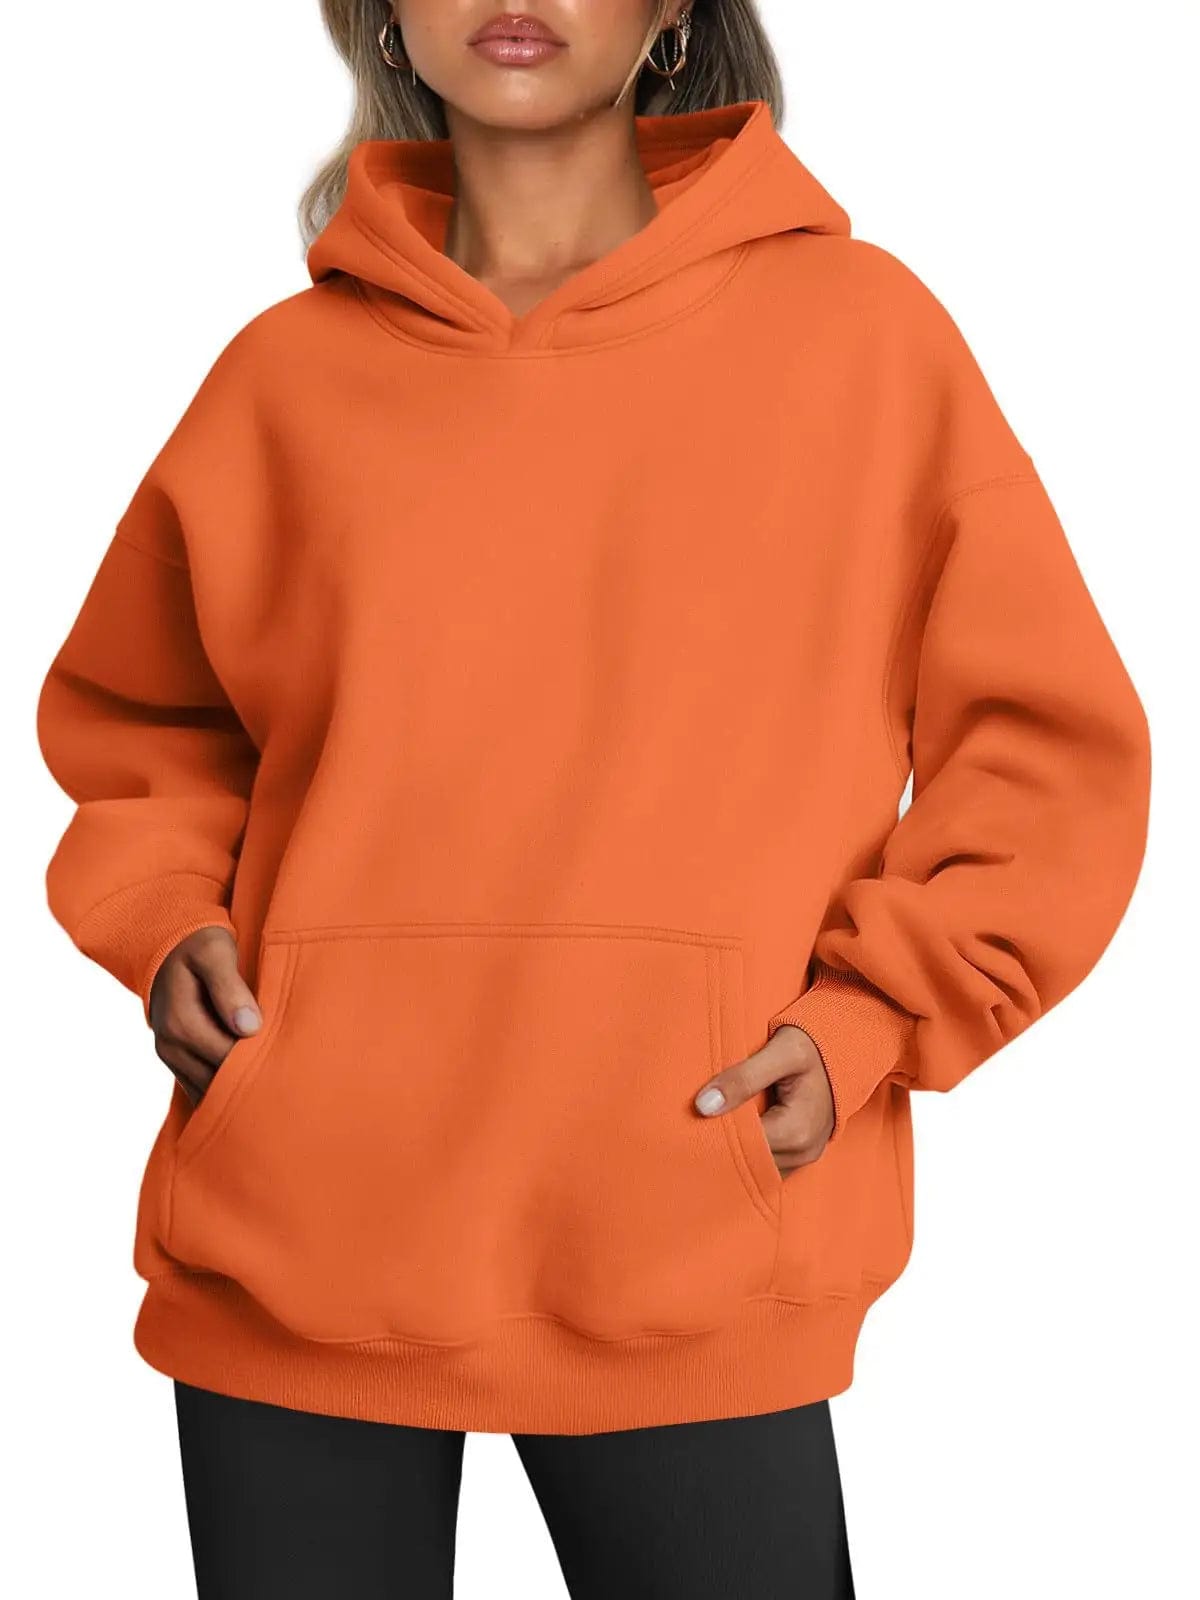 Cheky Orange / S Womens Loose Sweatshirts With Pocket Long Sleeve Pullover Hoodies Sweaters Winter Fall Outfits Sports Clothes